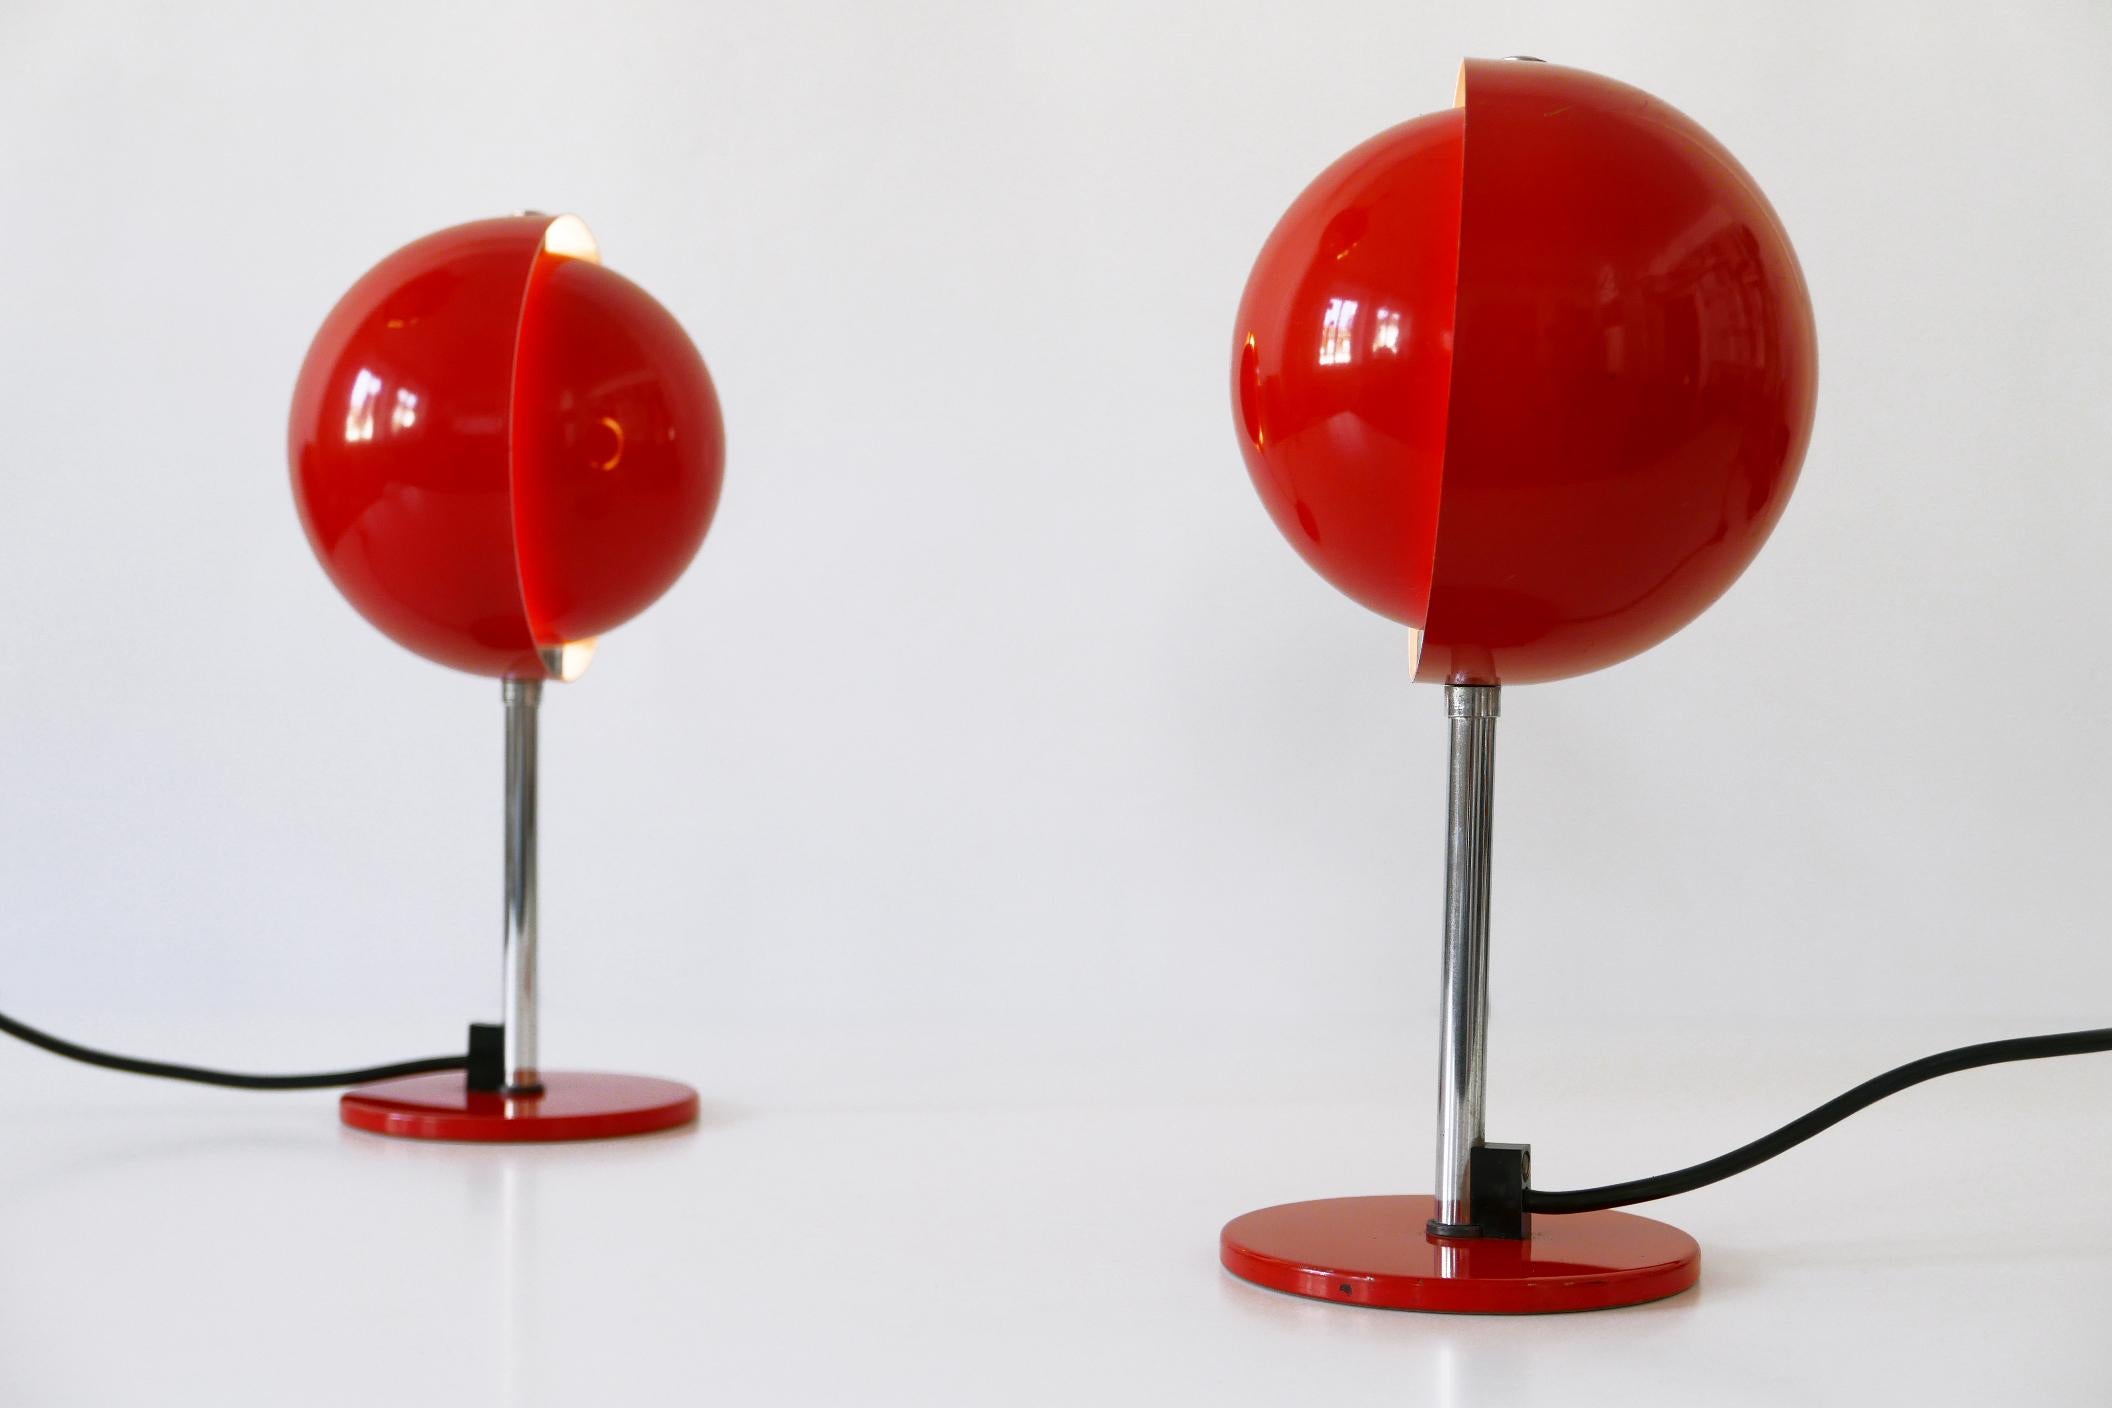 Set of two rare and beautiful Mid-Century Modern 'Moon' table lamps. Manufactured by Hustadt-Leuchten, 1960s, Germany.

Executed in red and white enameled metal, each lamp comes with 1 x E14 Edison screw fit bulb holder, is wired, in working